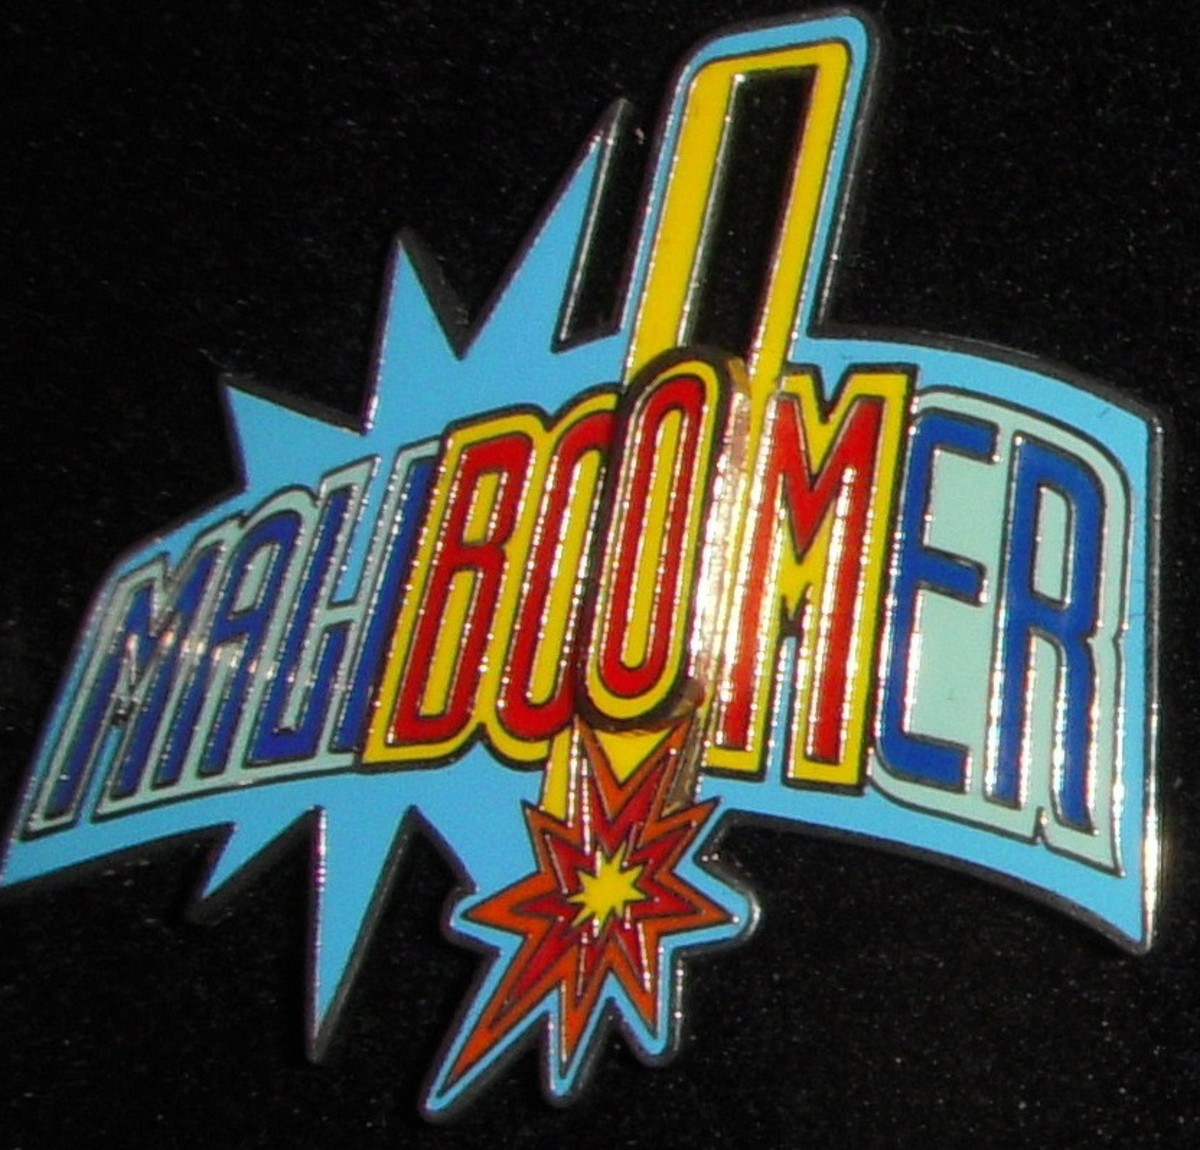 Pin for the MaliBoomer attraction has a sliding feature, the letter O.